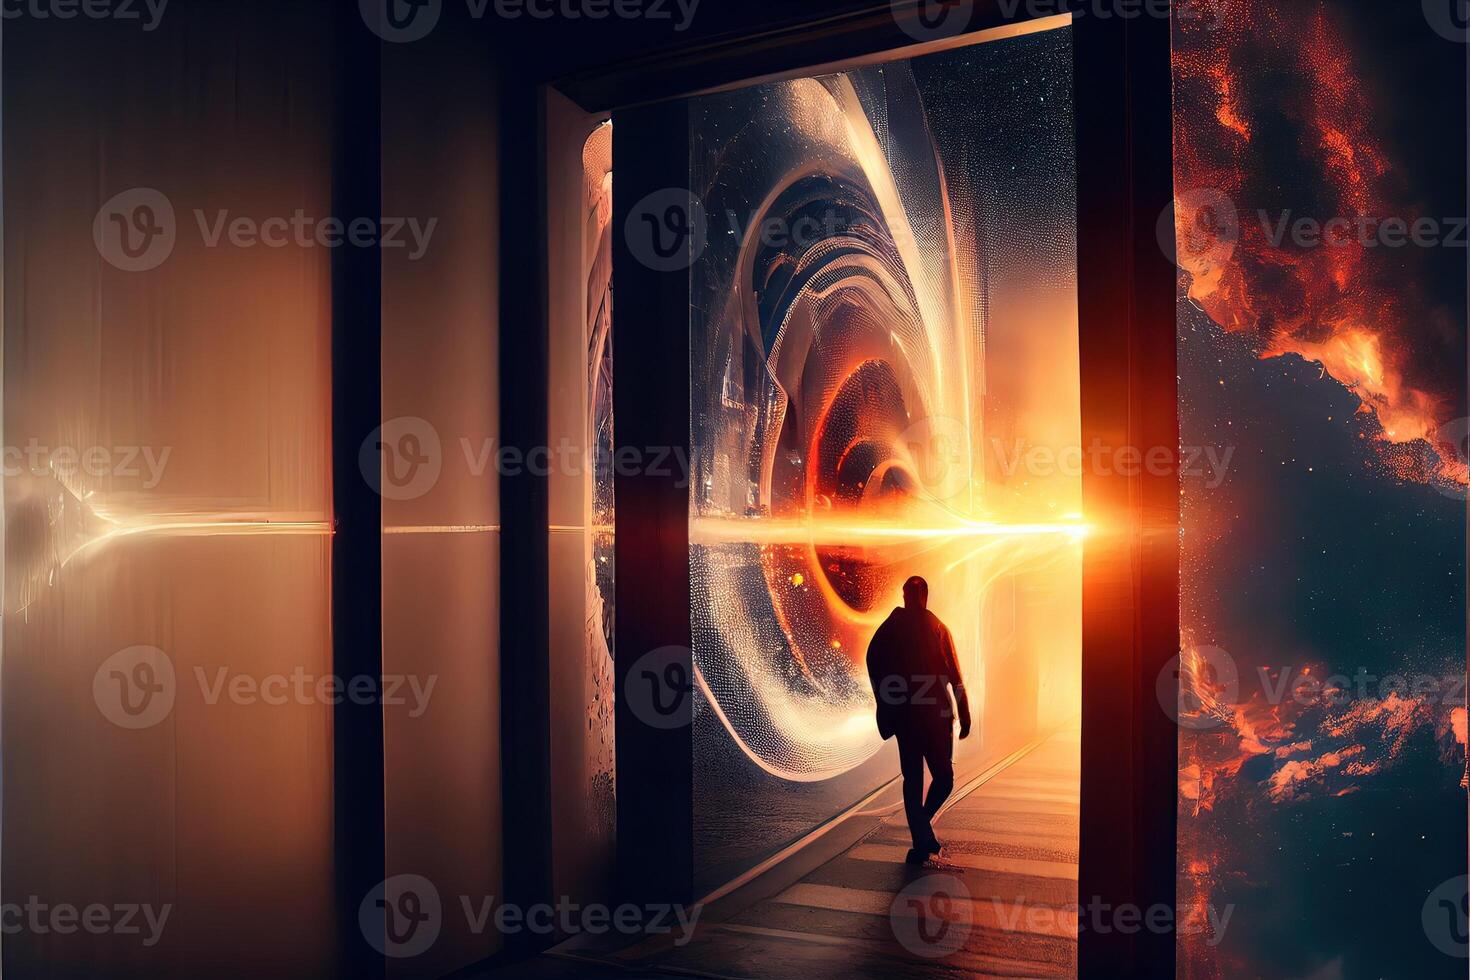 illustration of traveling through the door of the future with the speed of light photo